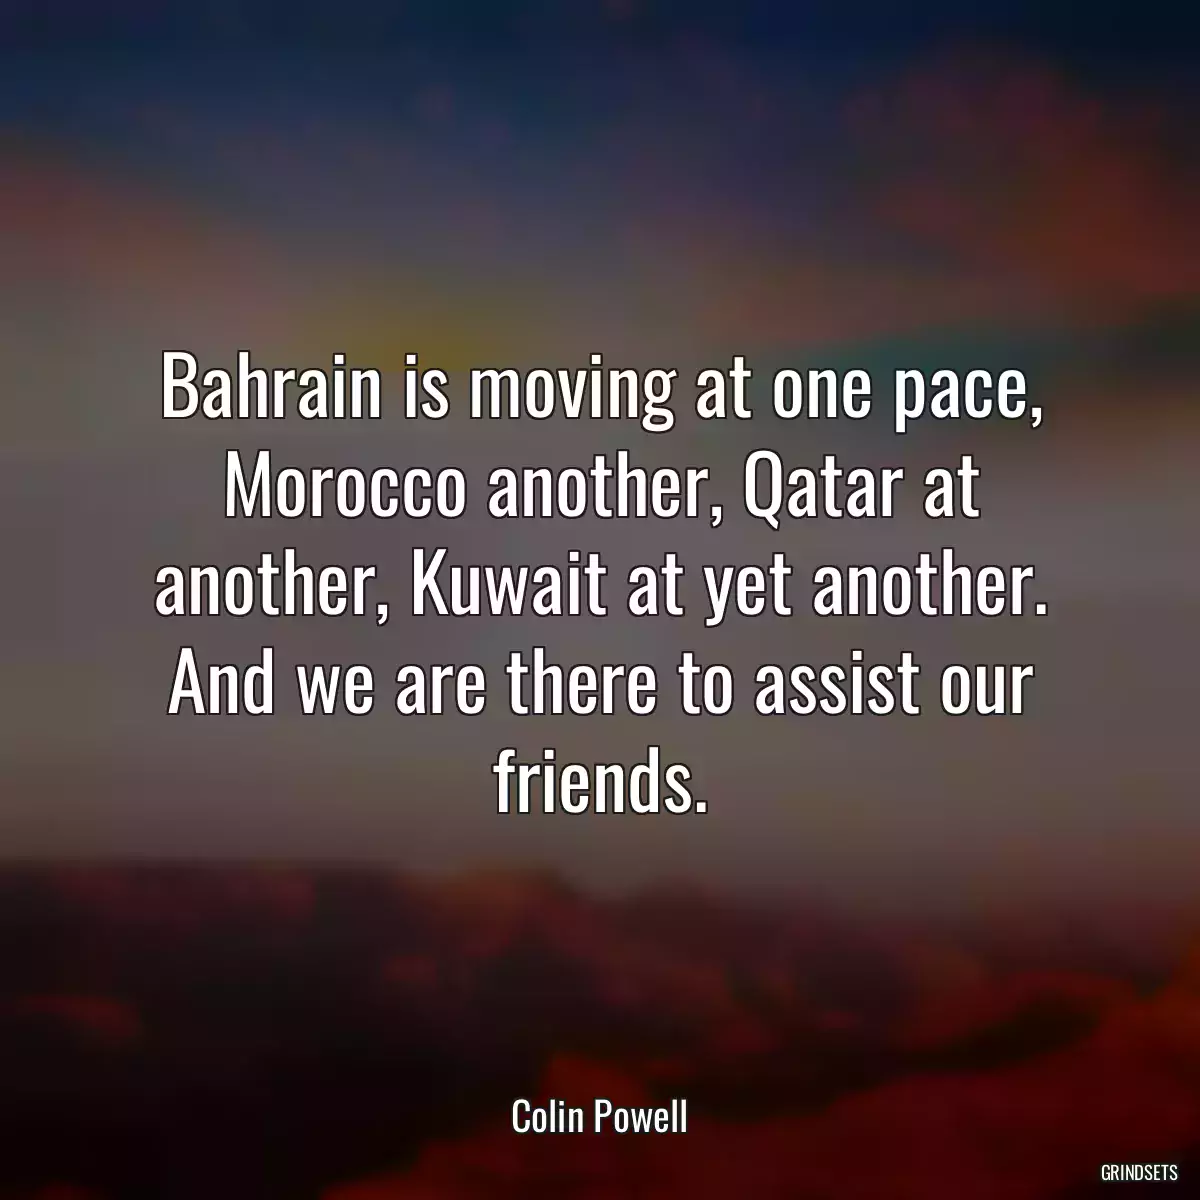 Bahrain is moving at one pace, Morocco another, Qatar at another, Kuwait at yet another. And we are there to assist our friends.